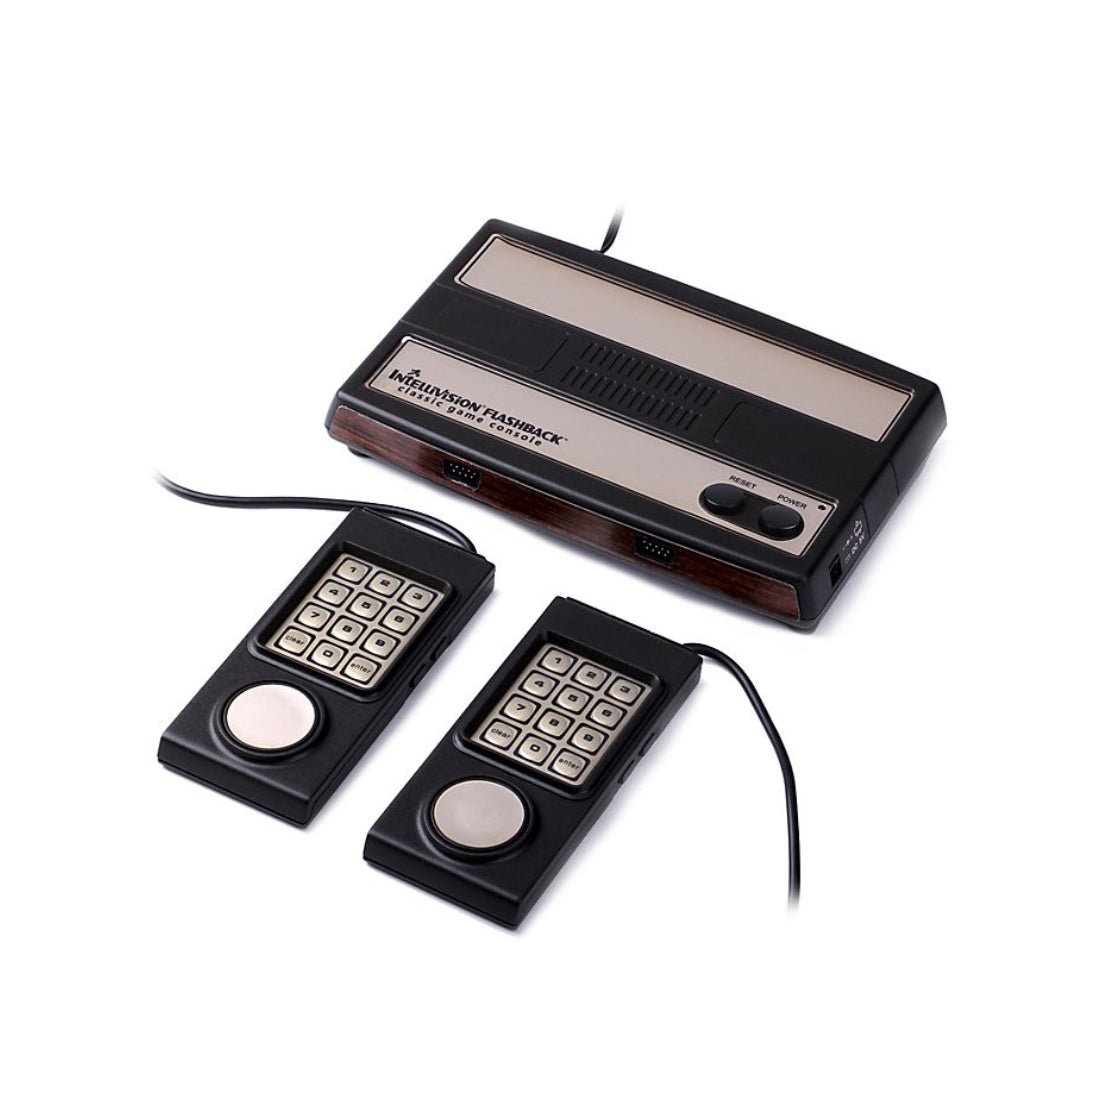 Atari IntelliVision Flashback Classic Console With Built-In 60 Games - جهاز ألعاب - Store 974 | ستور ٩٧٤